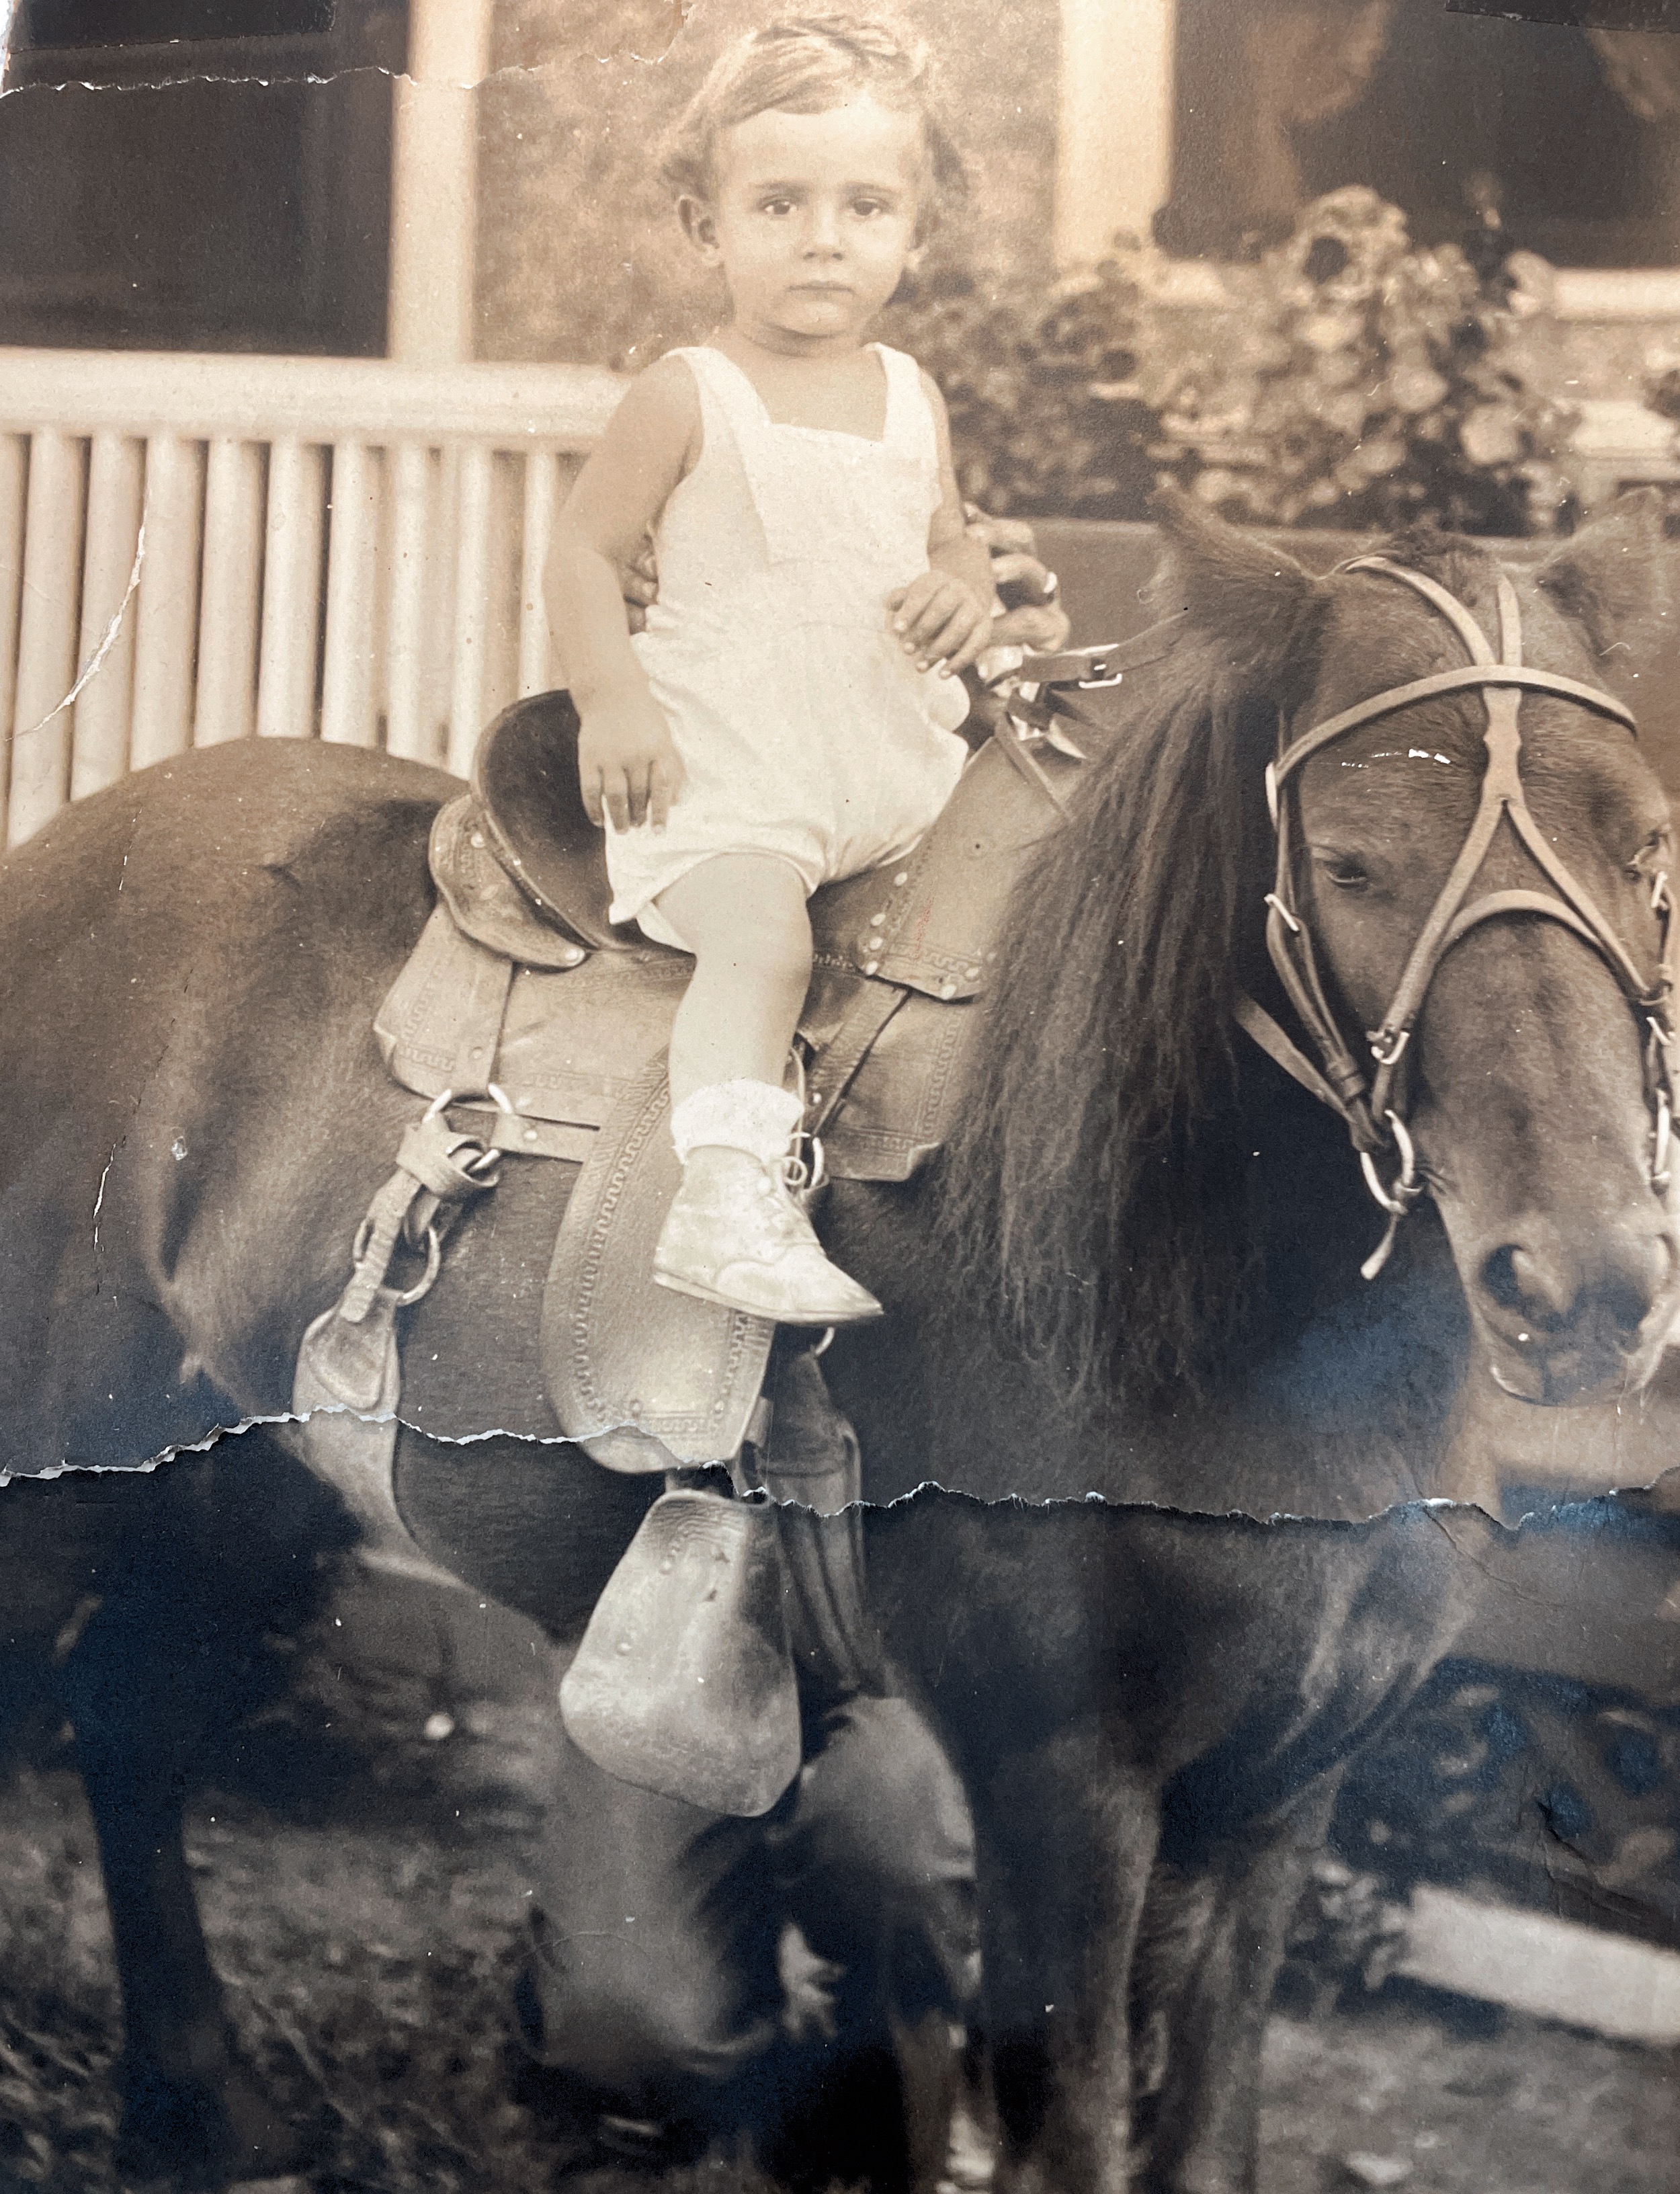 Uncle Warren, 1 year old. Papa is holding him on the horse. 1938